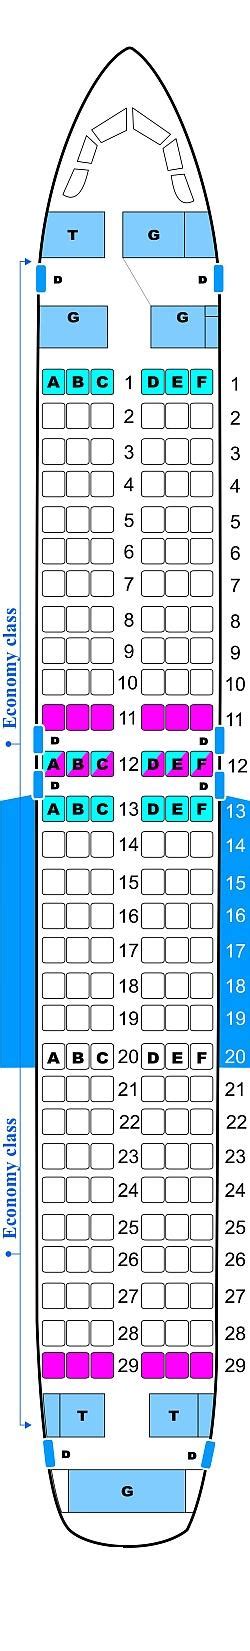 Airbus A Aircraft Seat Maps Specs And Amenities Images And Photos